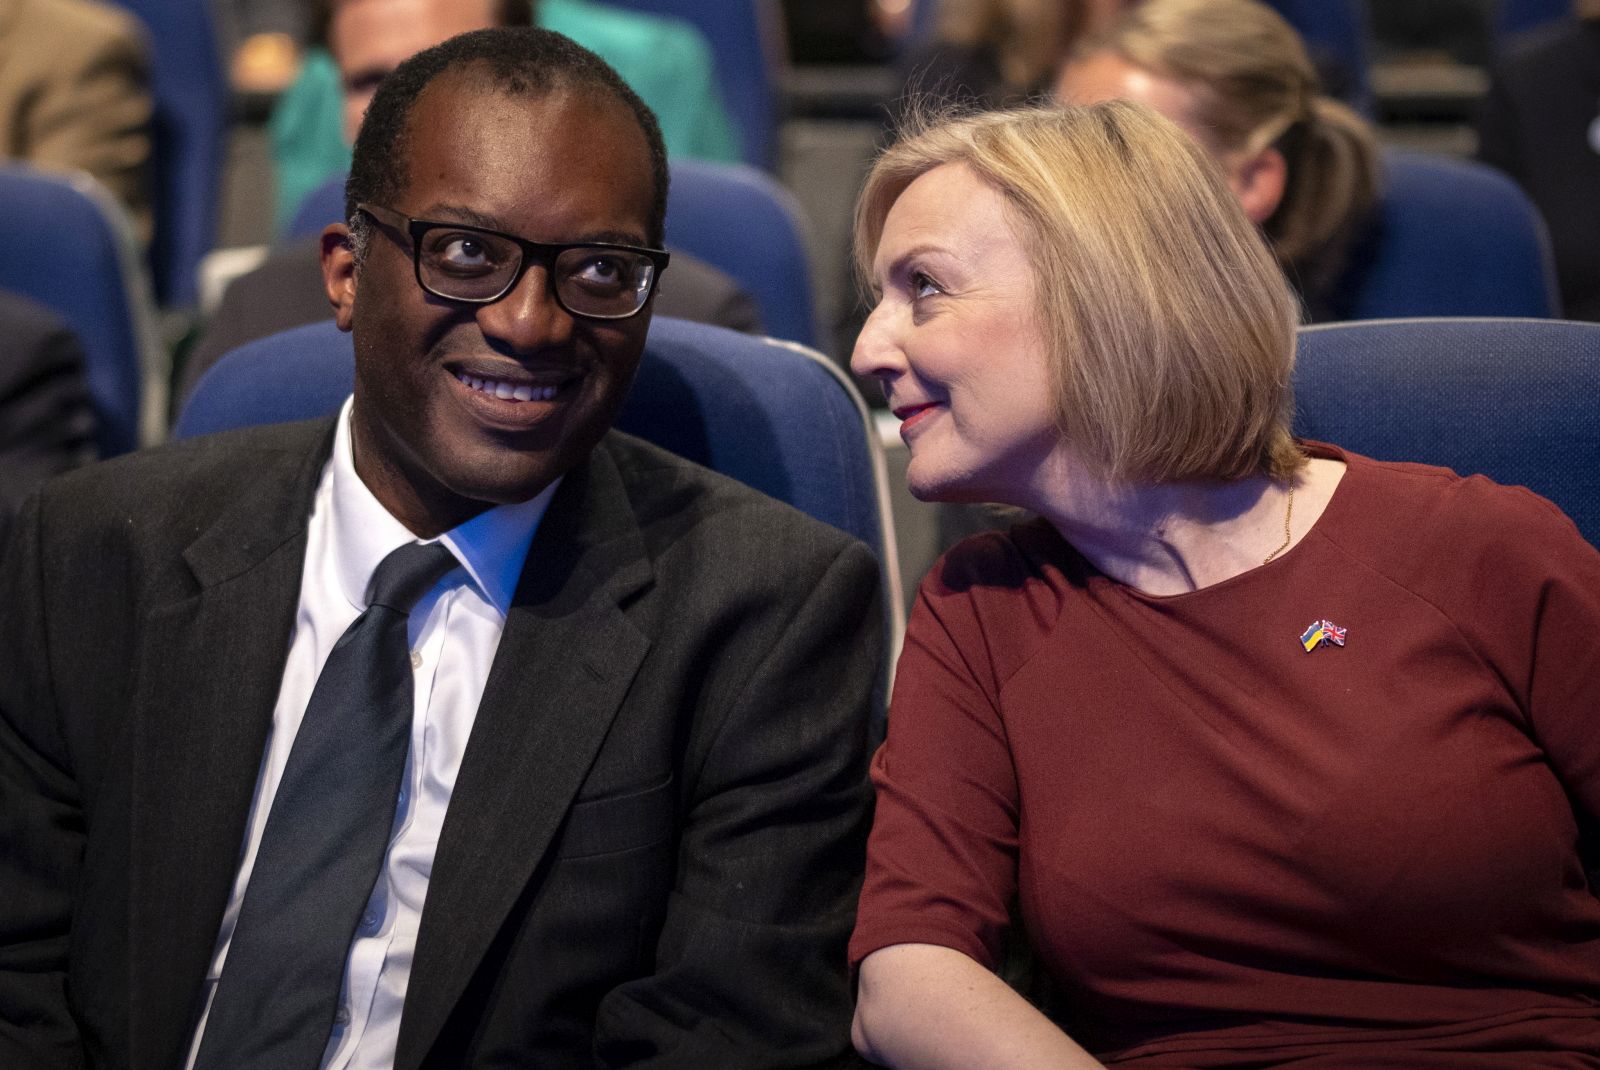 epa10243136 (FILE) - British Prime Minister Liz Truss (R) and Britain's Chancellor of the Exchequer Kwasi Kwarteng (L) chat at the opening session of Conservative Party Conference in Birmingham, Britain, 02 October 2022 (reissued 14 October 2022). British Chancellor Kwarteng on 14 October 2022 announced he has accepted the prime minister's call for him resign after 38 days in office.  EPA/TOLGA AKMEN *** Local Caption *** 57966048